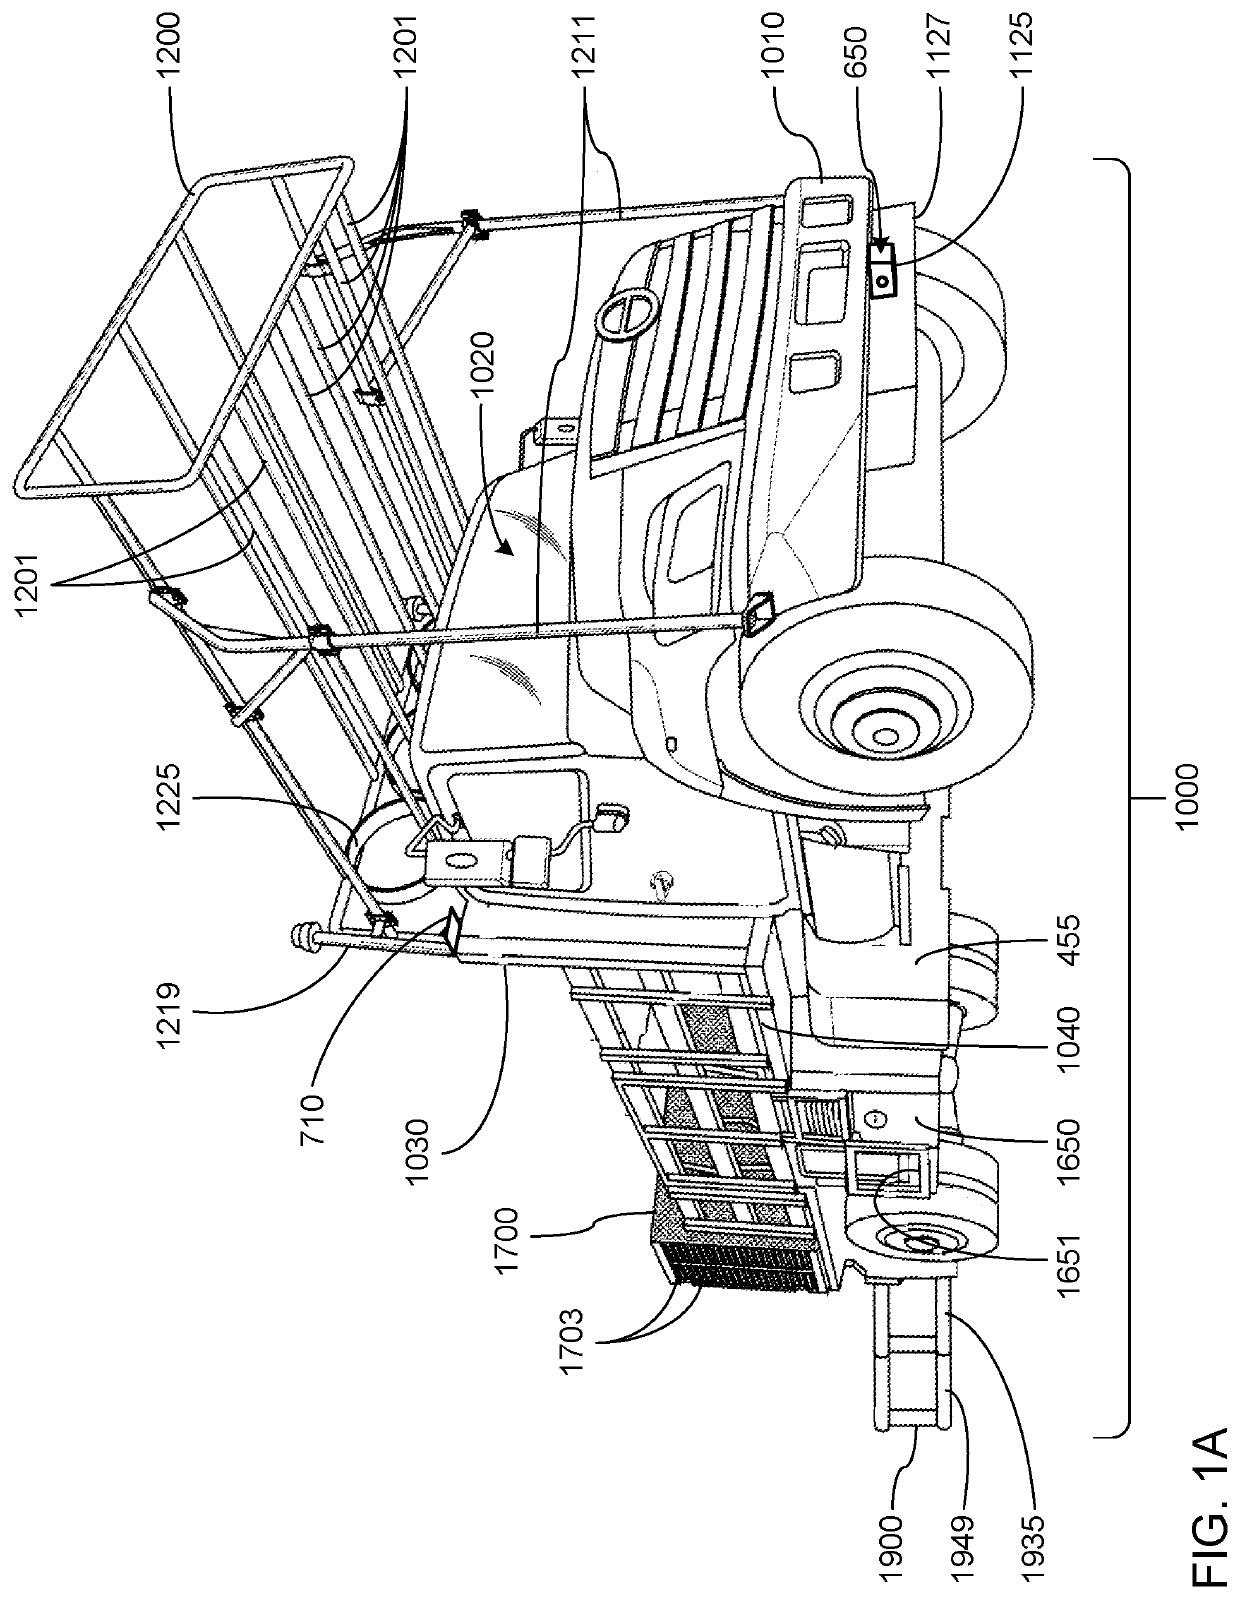 Safety truck attachments, and methods of safety truck use